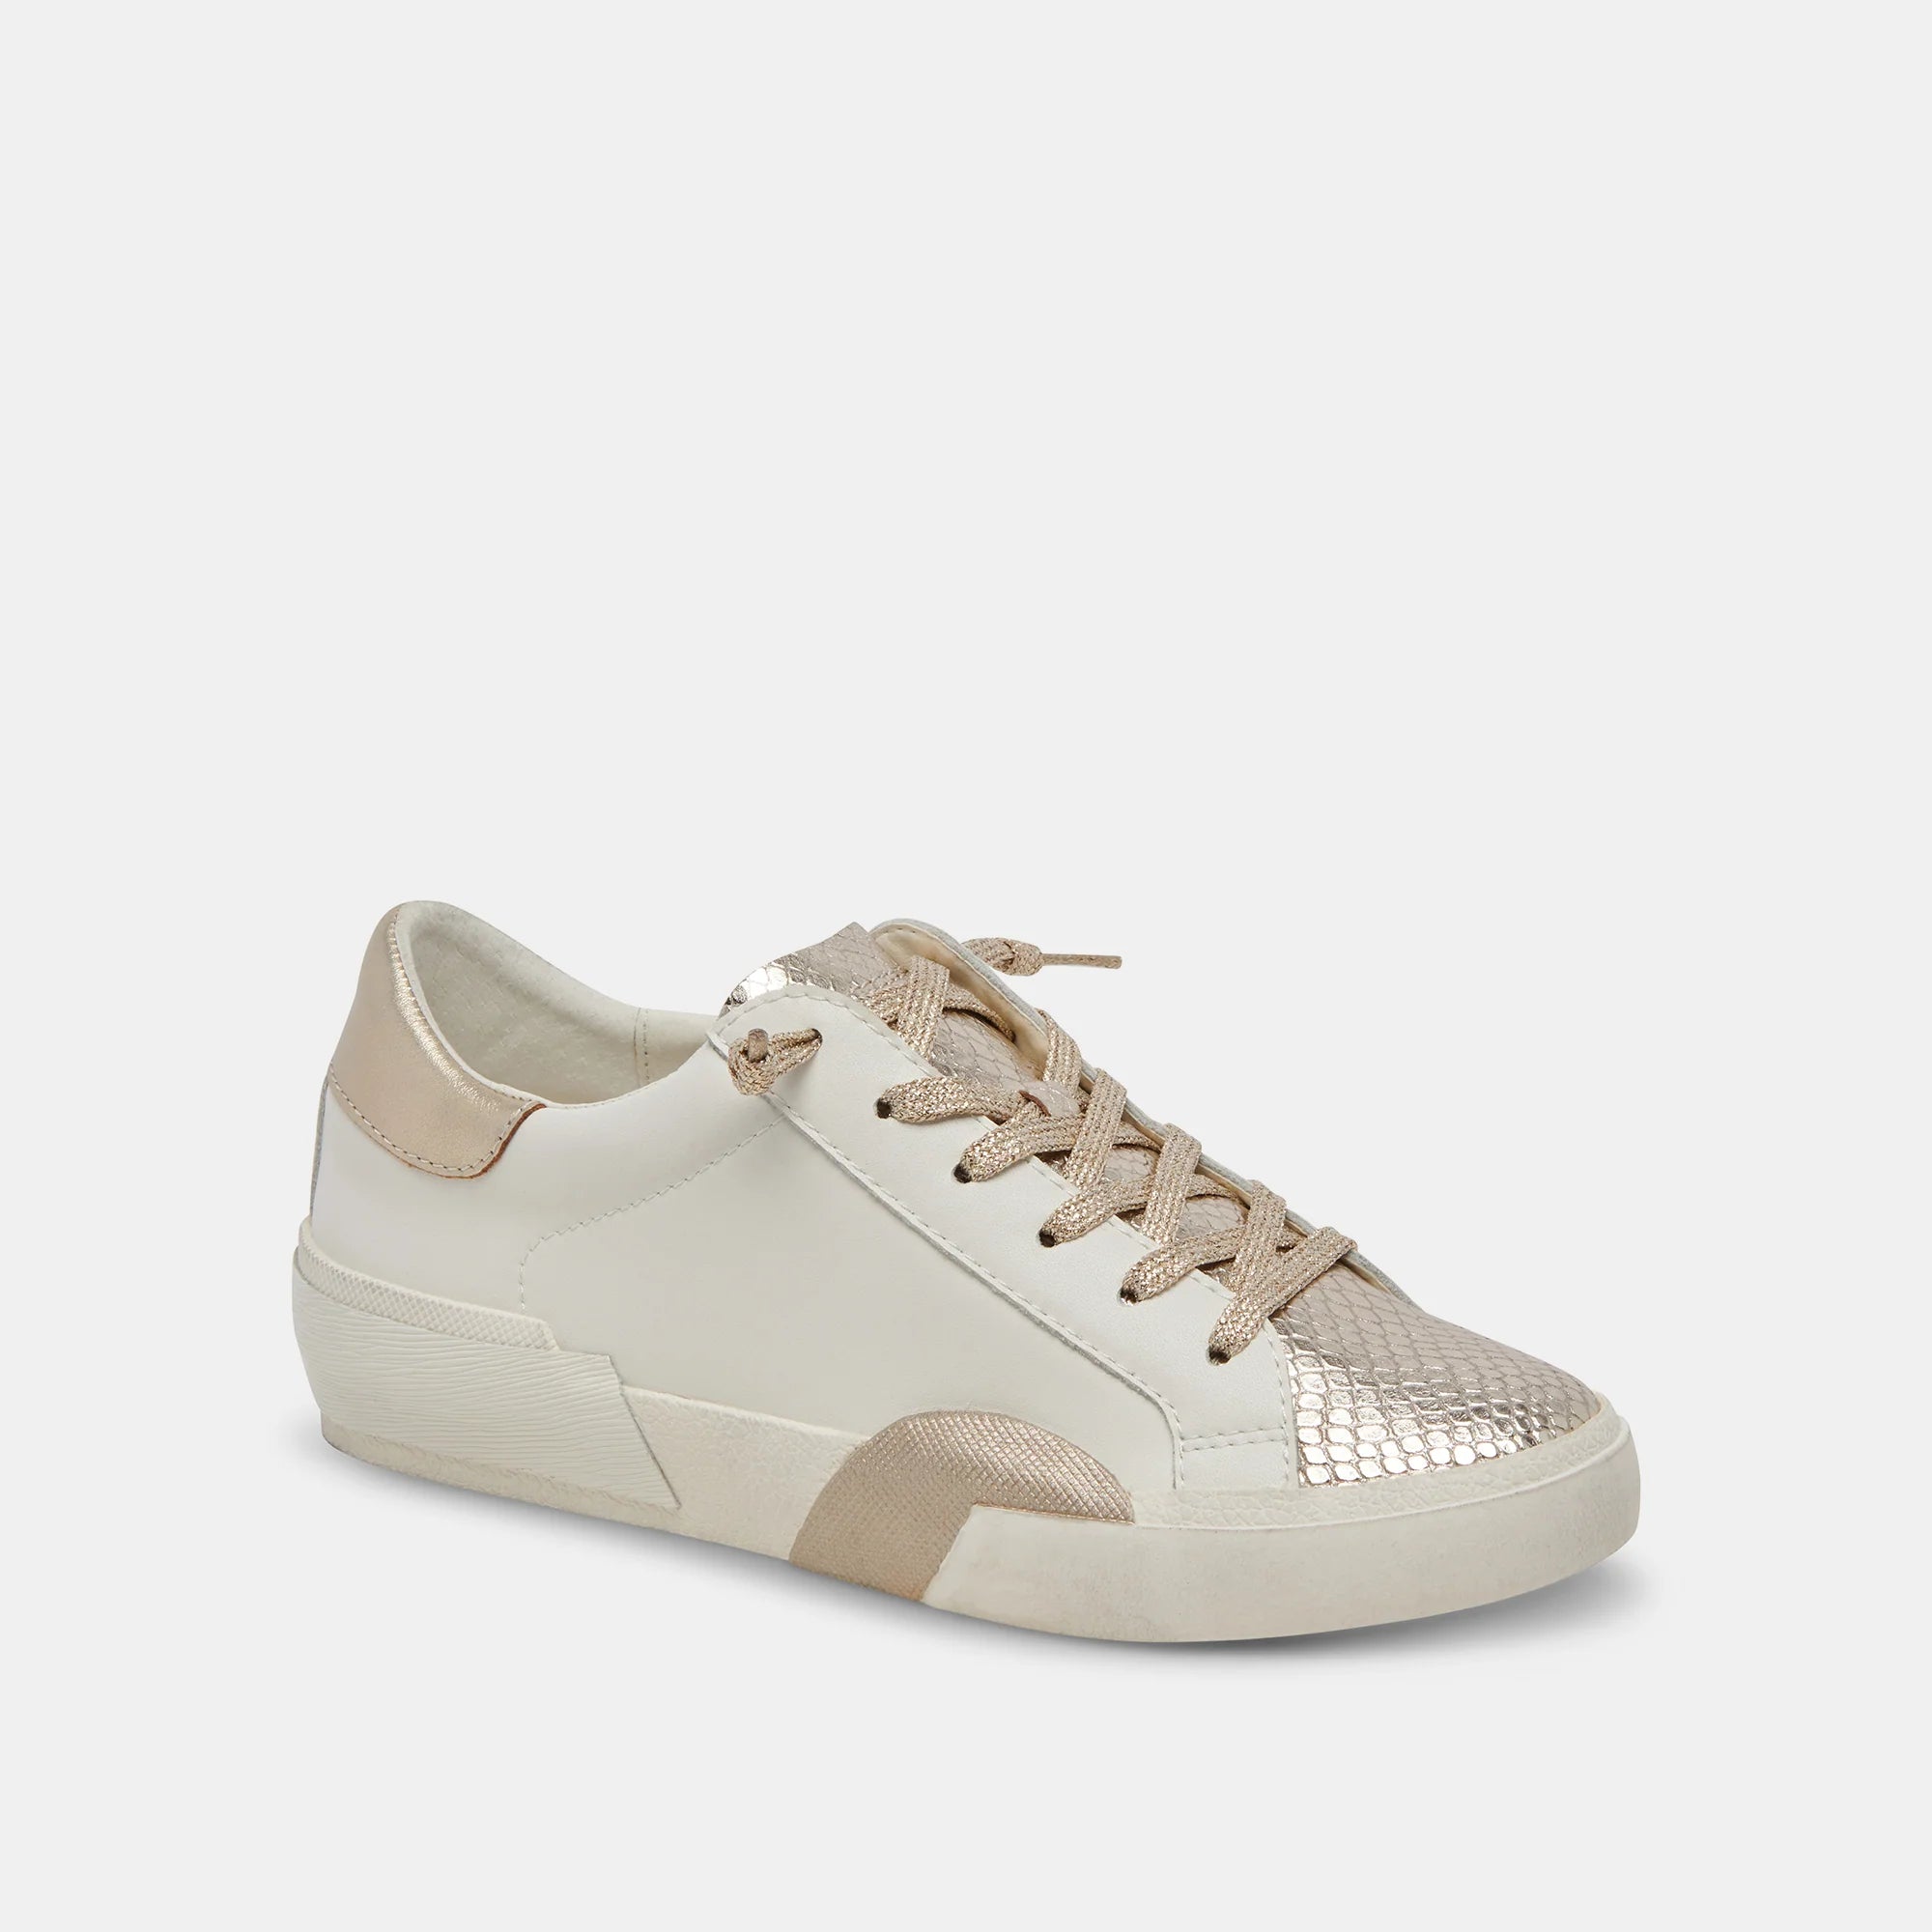 Zina Sneakers - White/Gold Leather